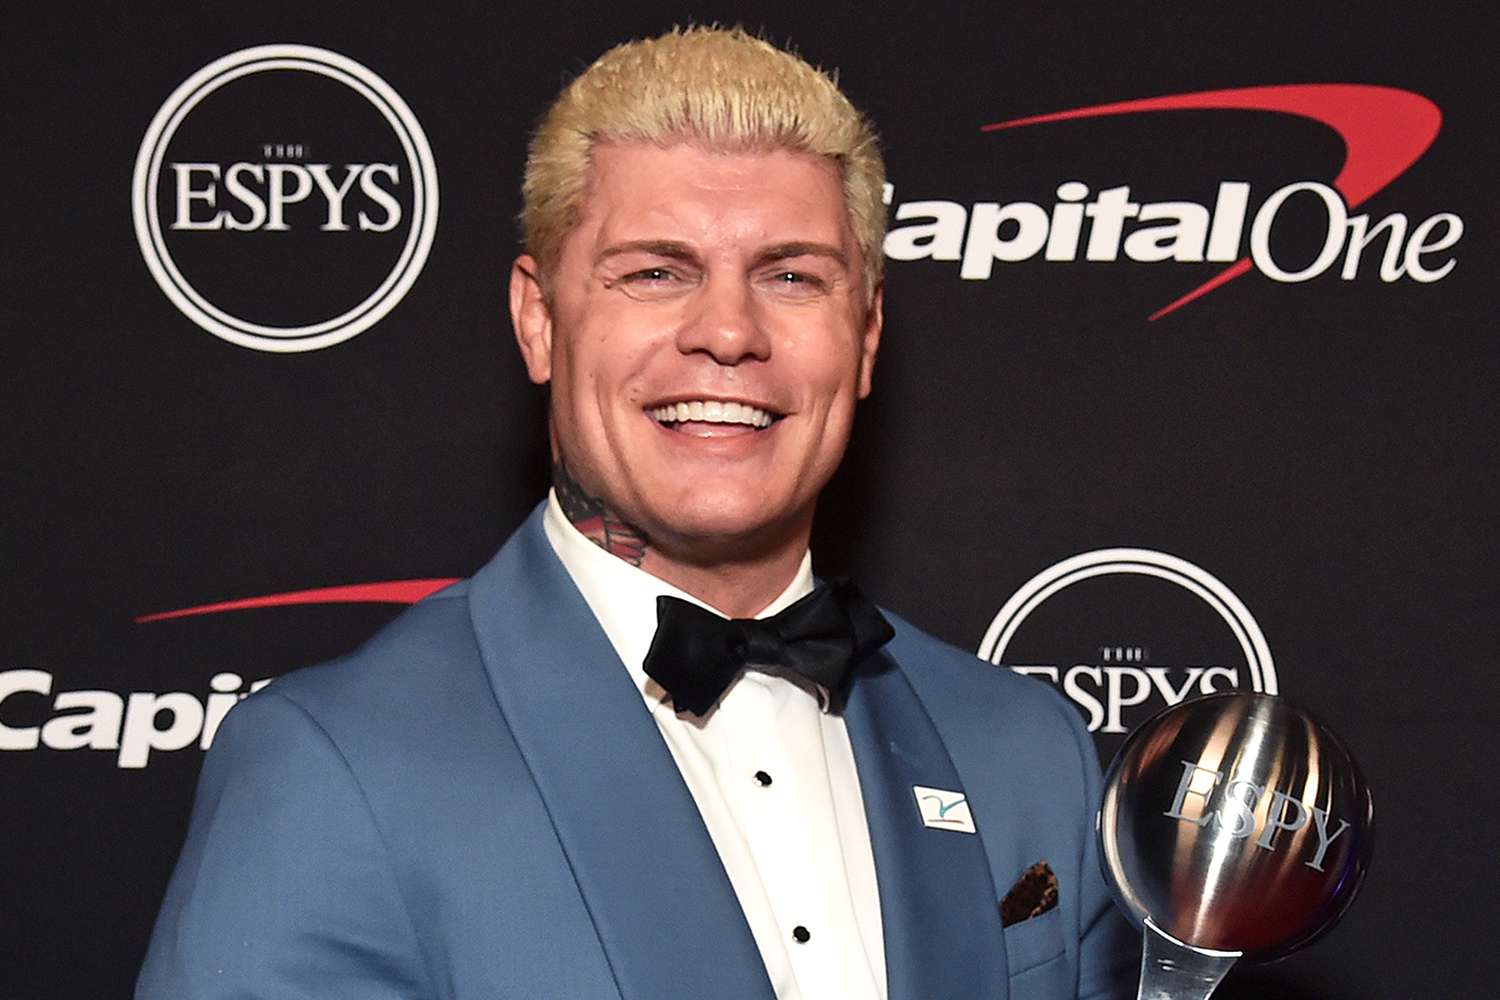 Cody Rhodes Expresses Gratitude For Fan Support Amid Rock Storyline Controversy